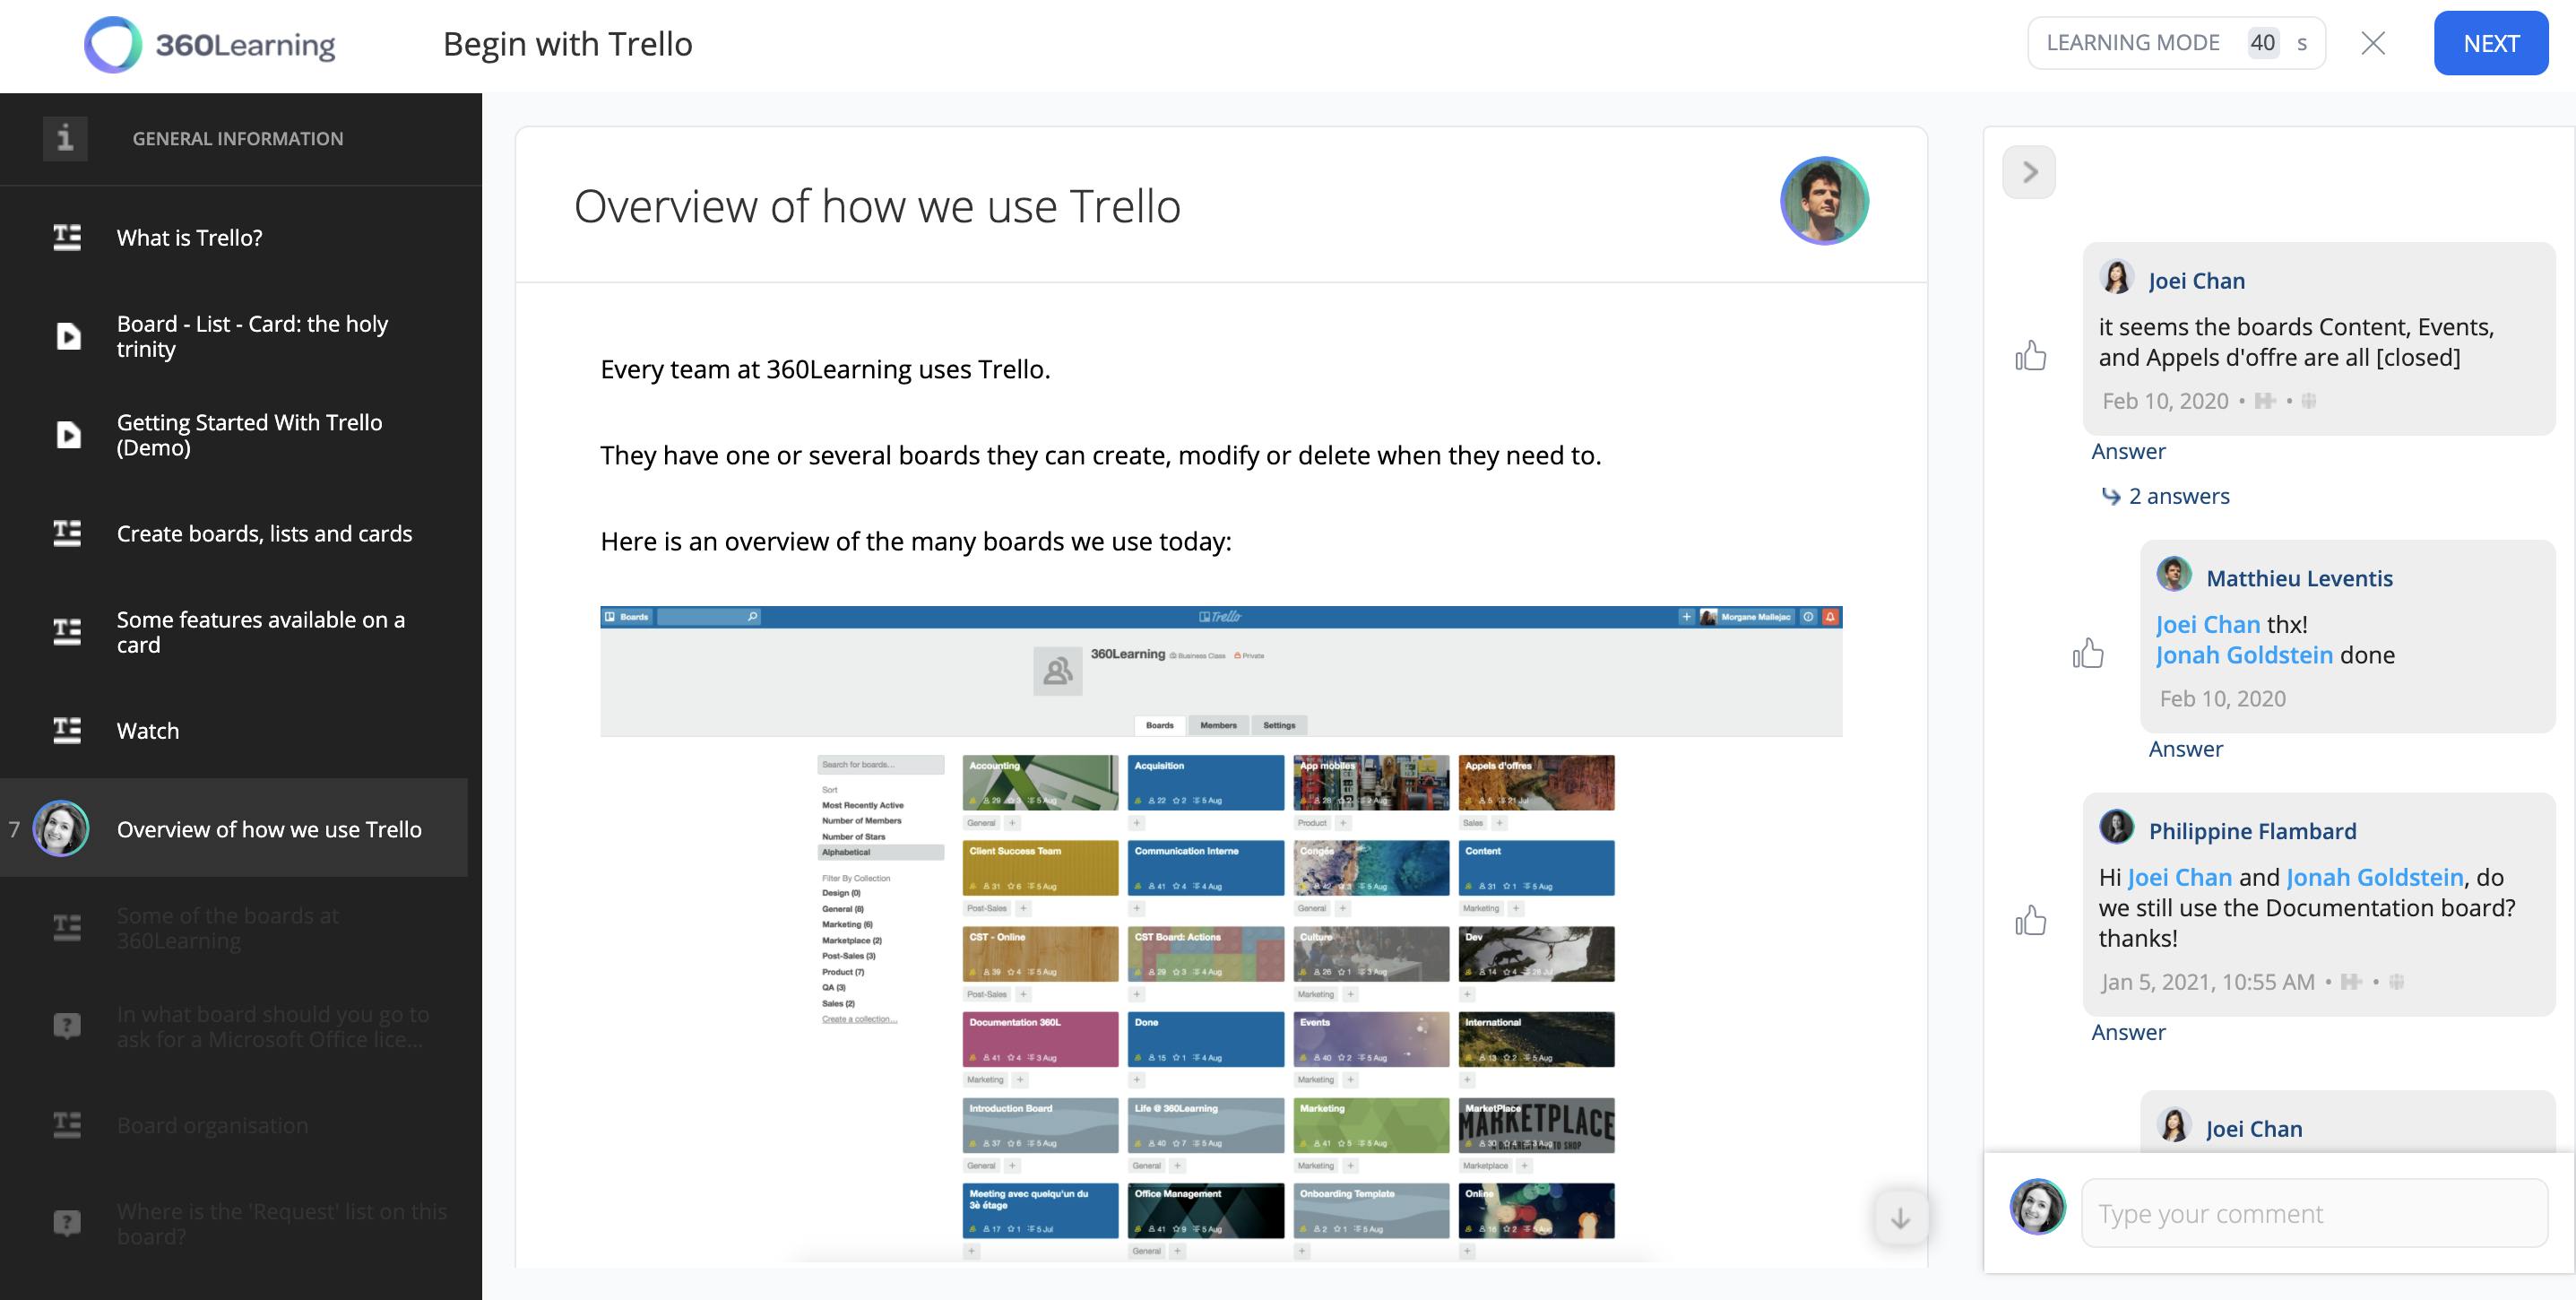 How we use Trello for collaboration